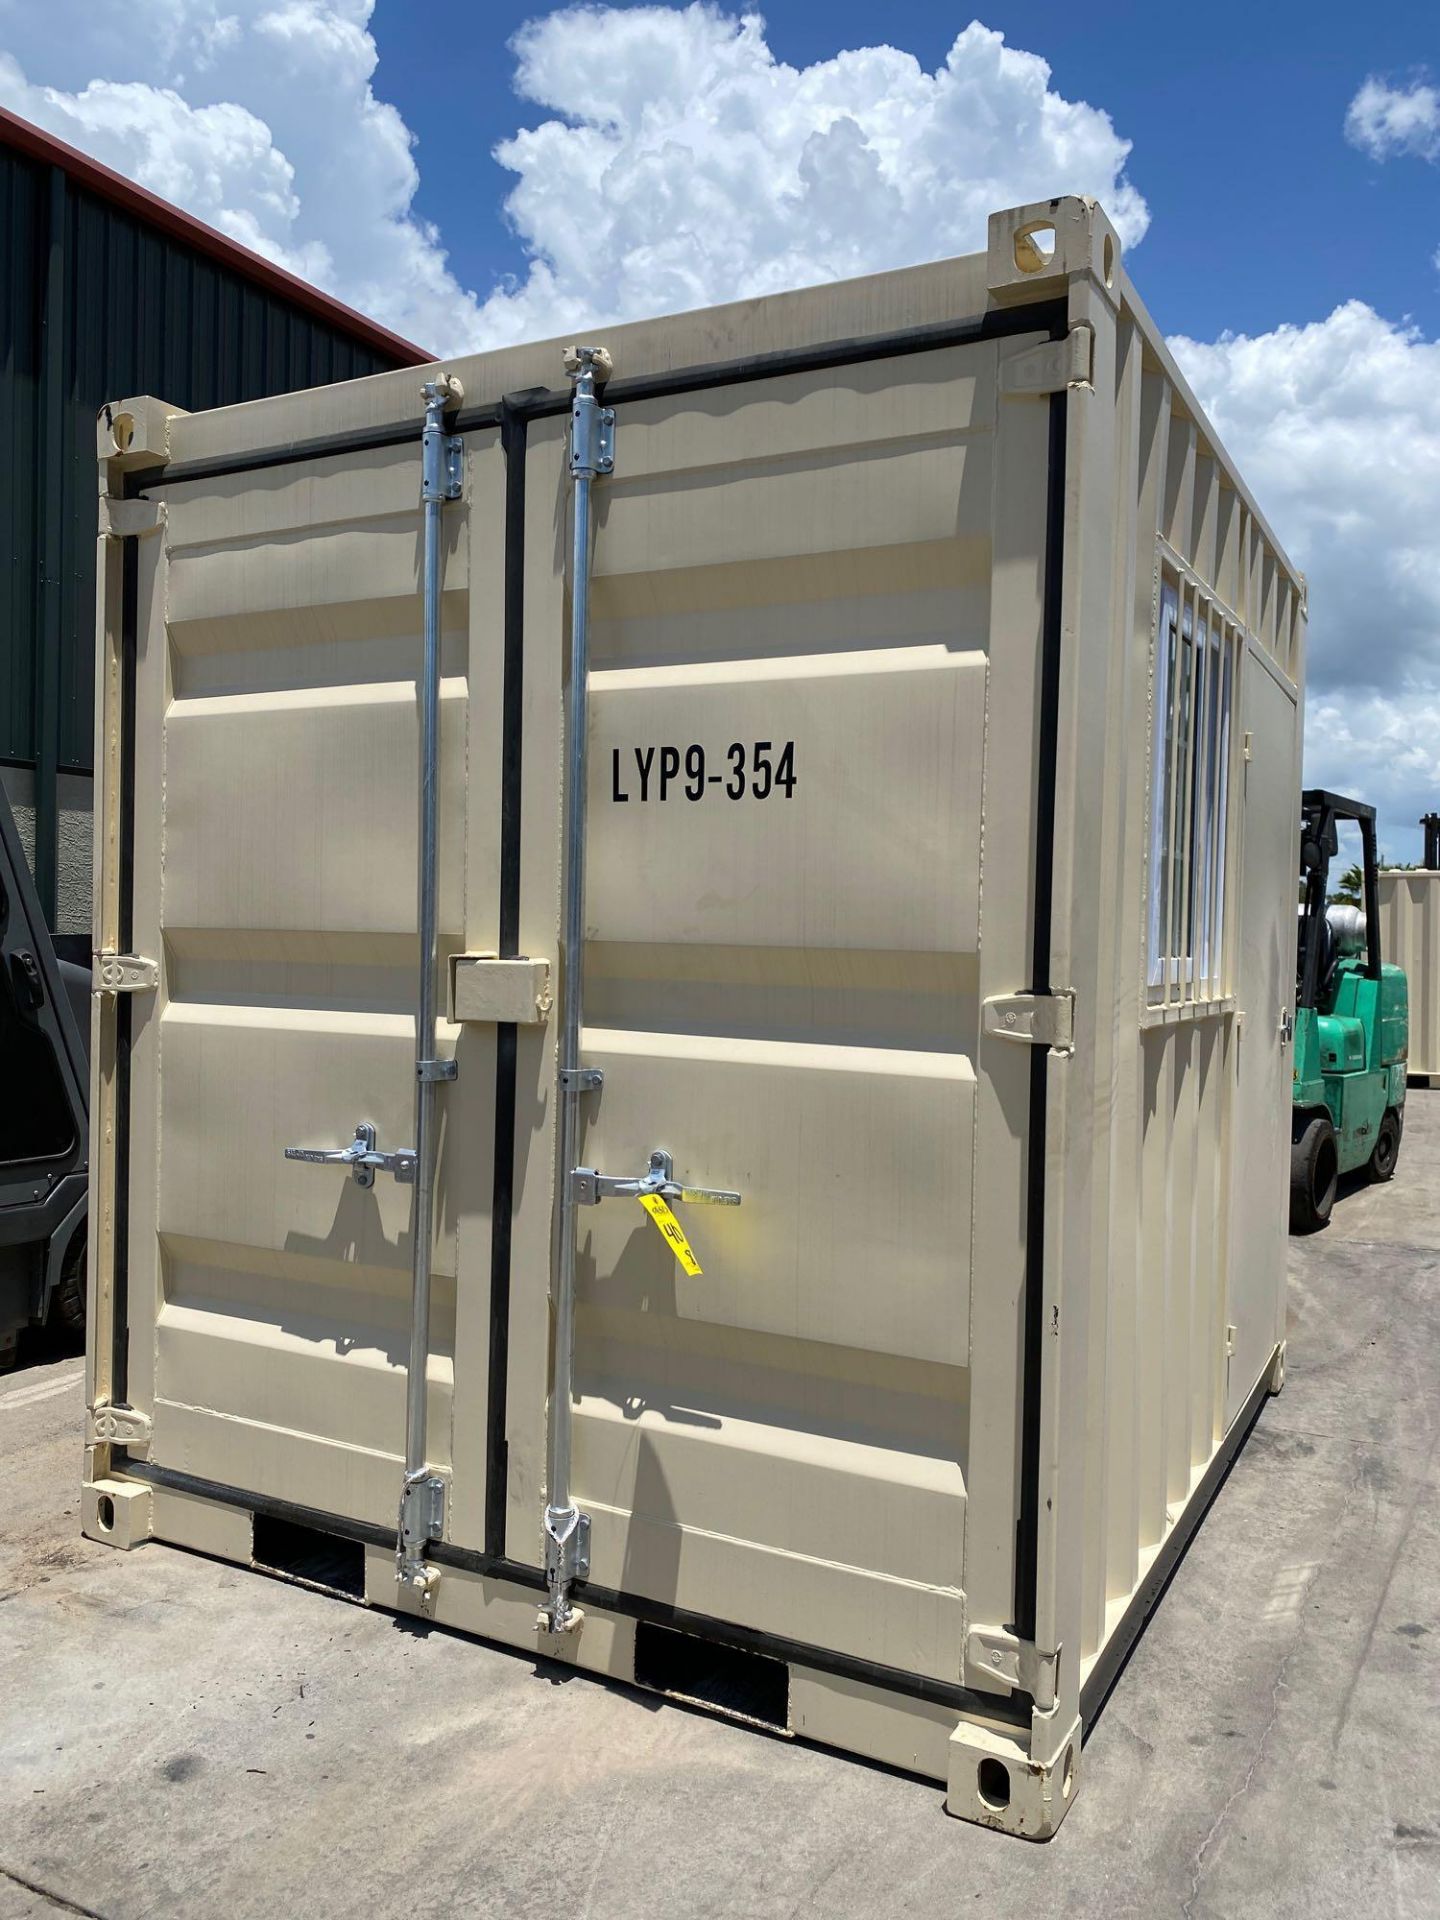 UNUSED 2020 PORTABLE OFFICE CONTAINER WITH WINDOW & SIDE DOOR.